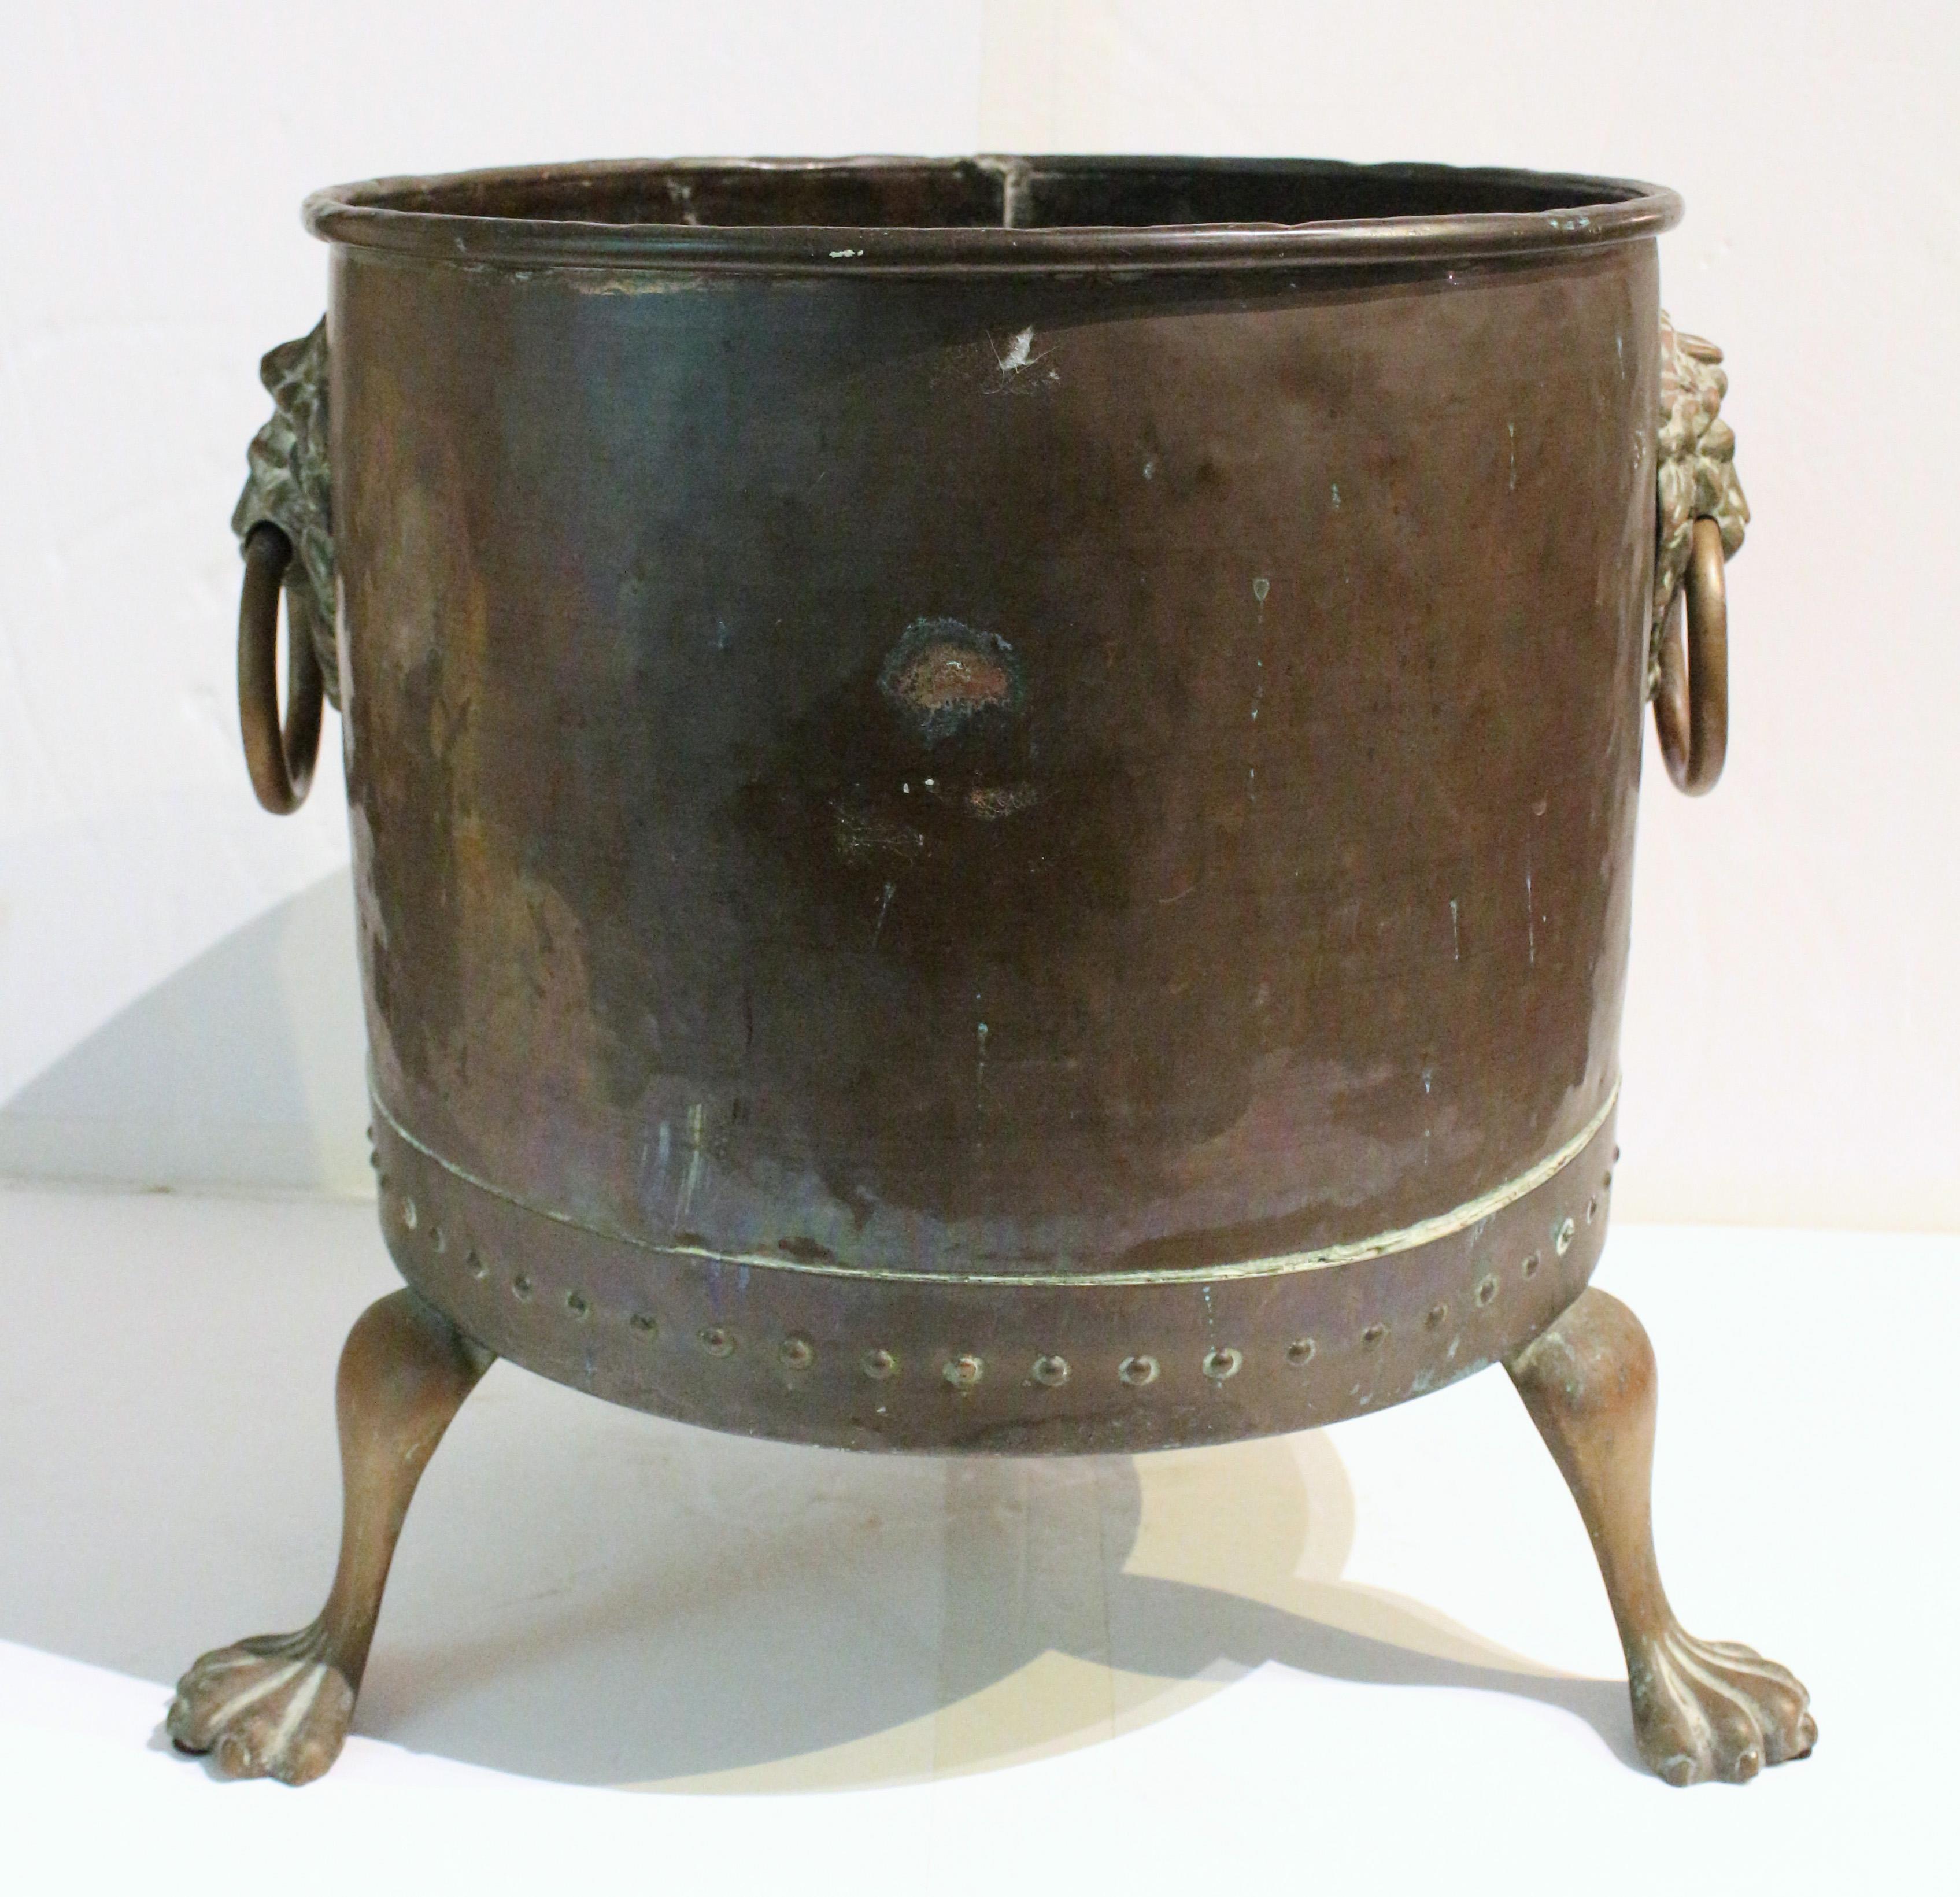 Circa 1880 round copper log bin on paw feet, English. Very well modelled lion masks with ring handles. Three shaped legs ending in paw feet. Condition commensurate with age & use.
16 1/4